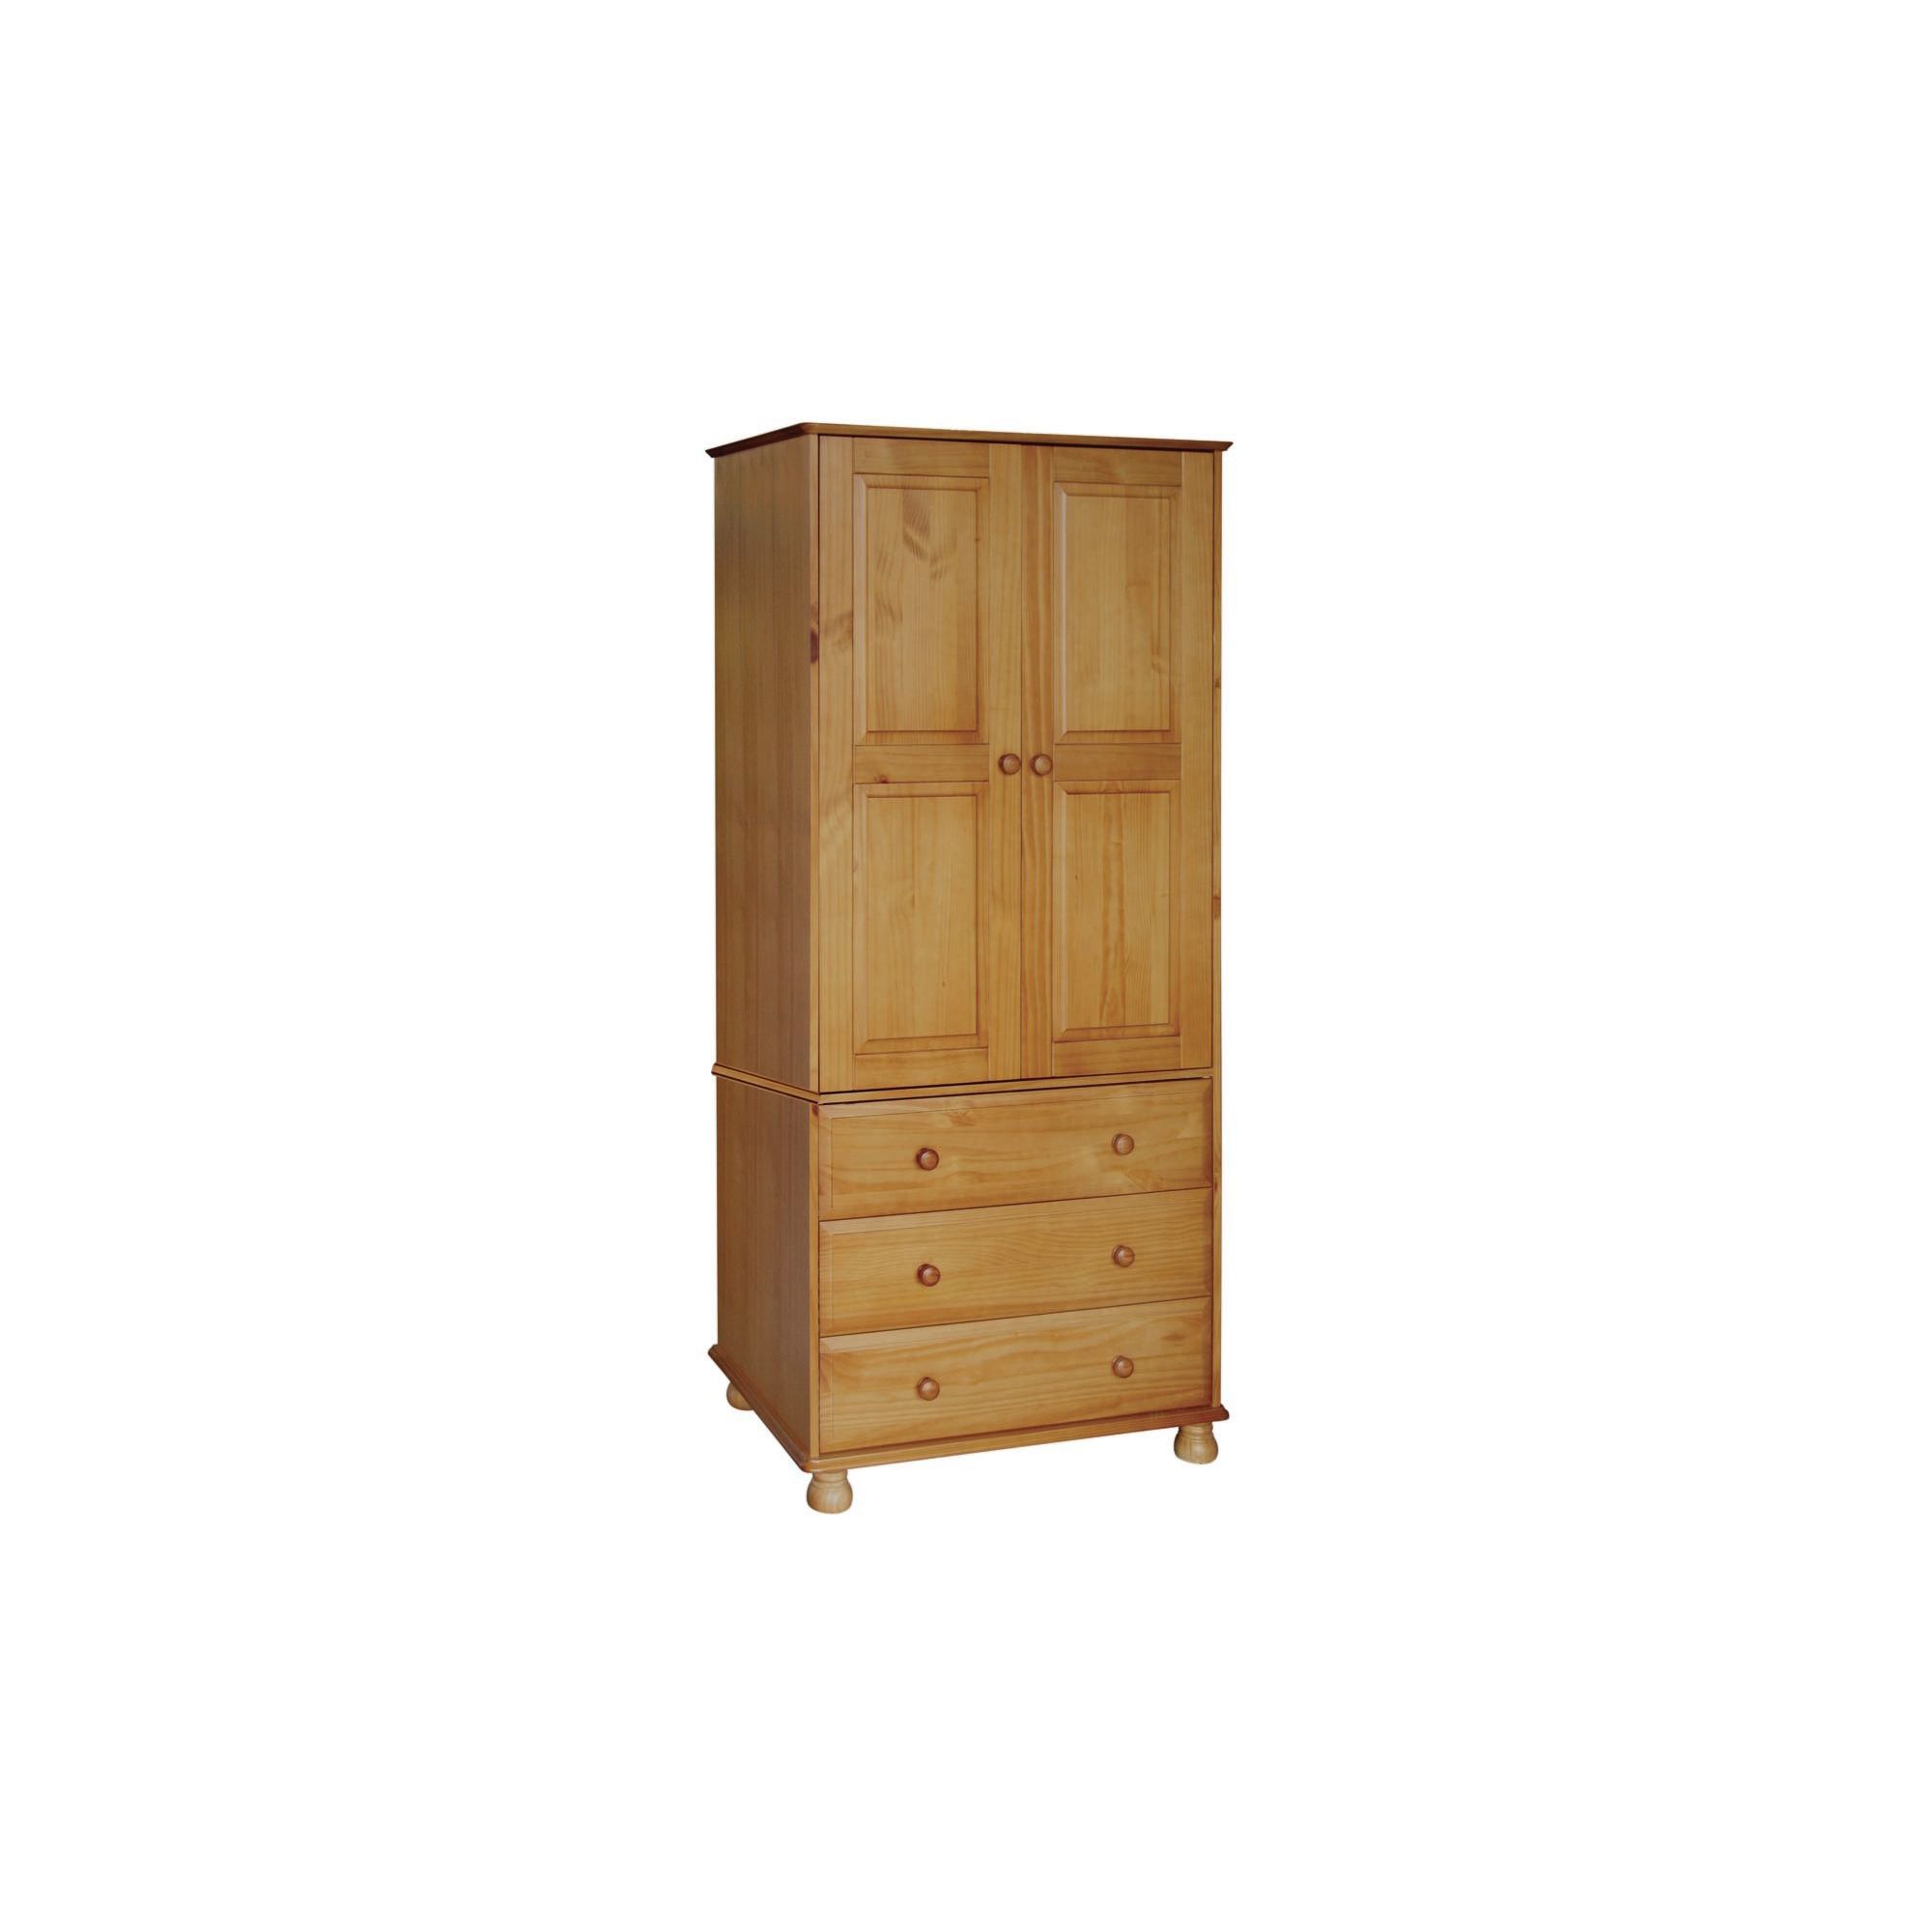 Home Essence Sheraton 3 Drawer Wardrobe in Solid Pine at Tesco Direct